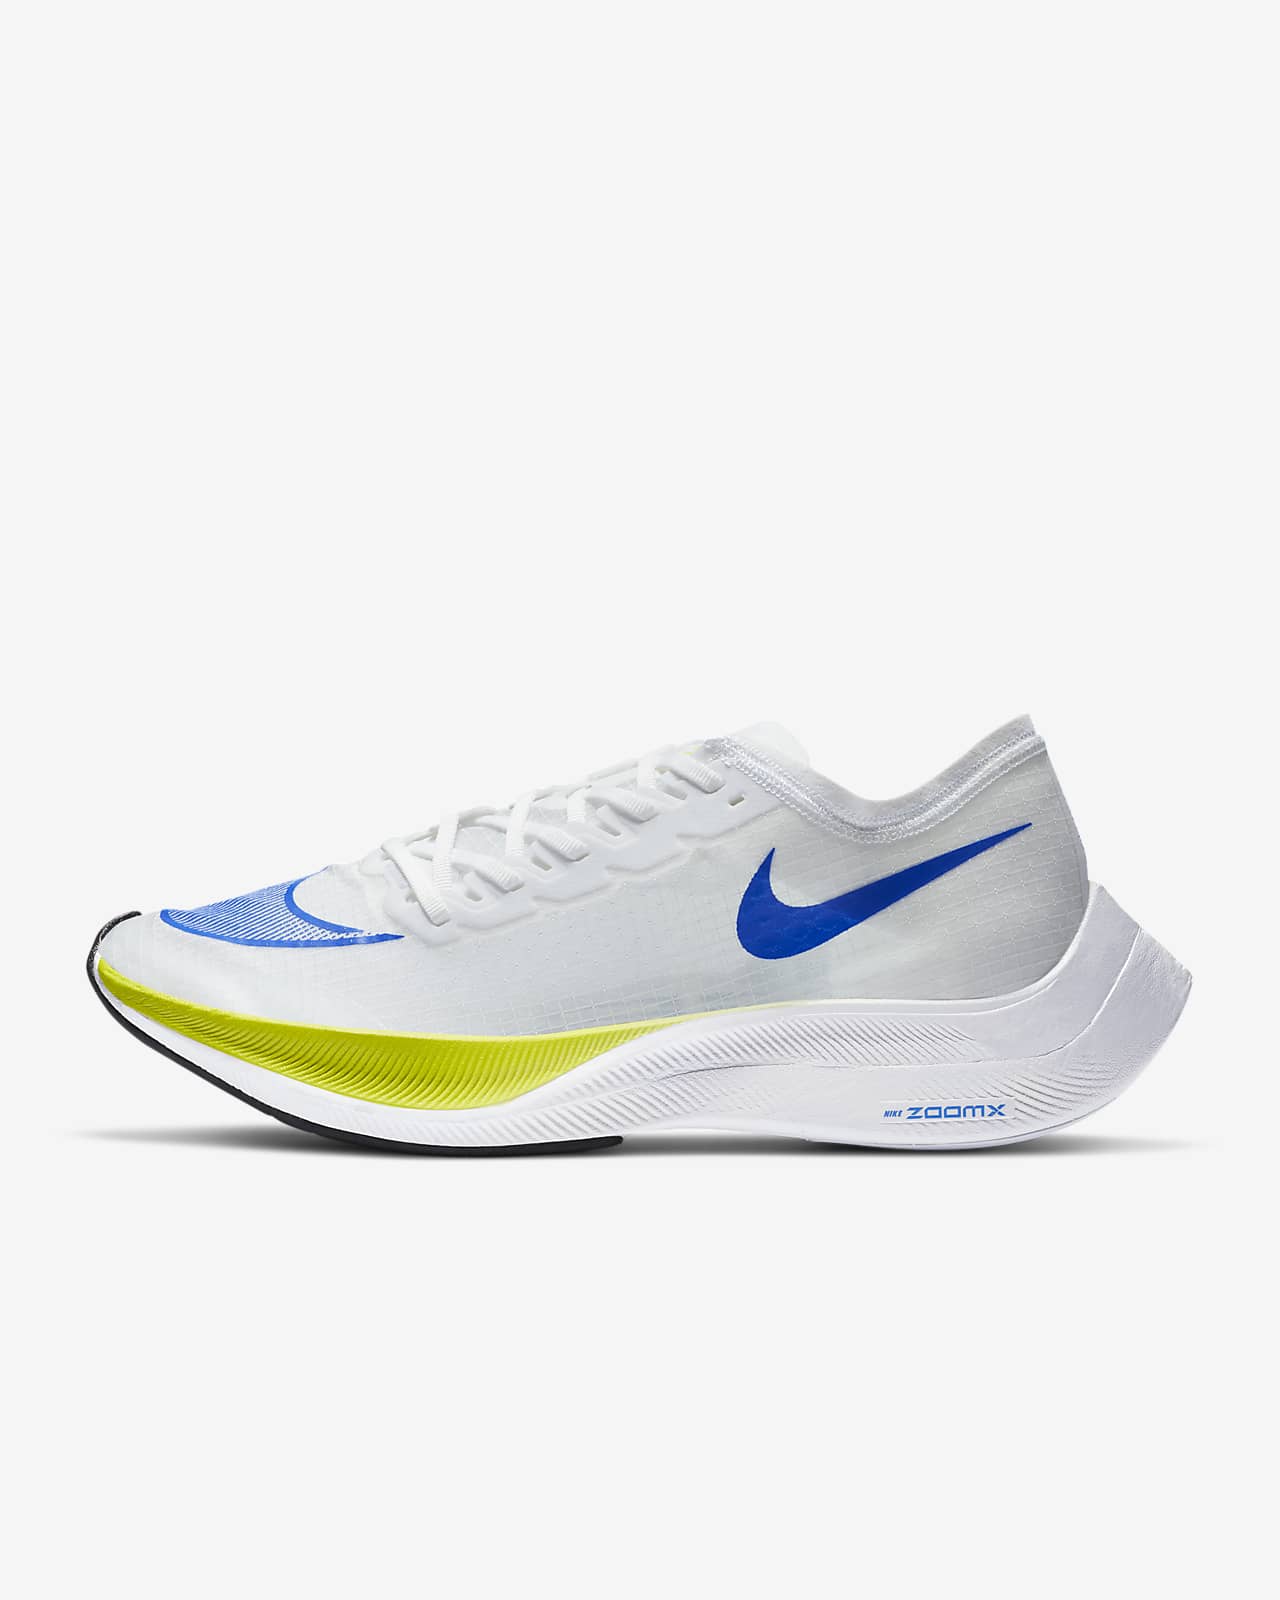 Nike ZoomX Vaporfly NEXT% Road Racing Shoes. Nike CA